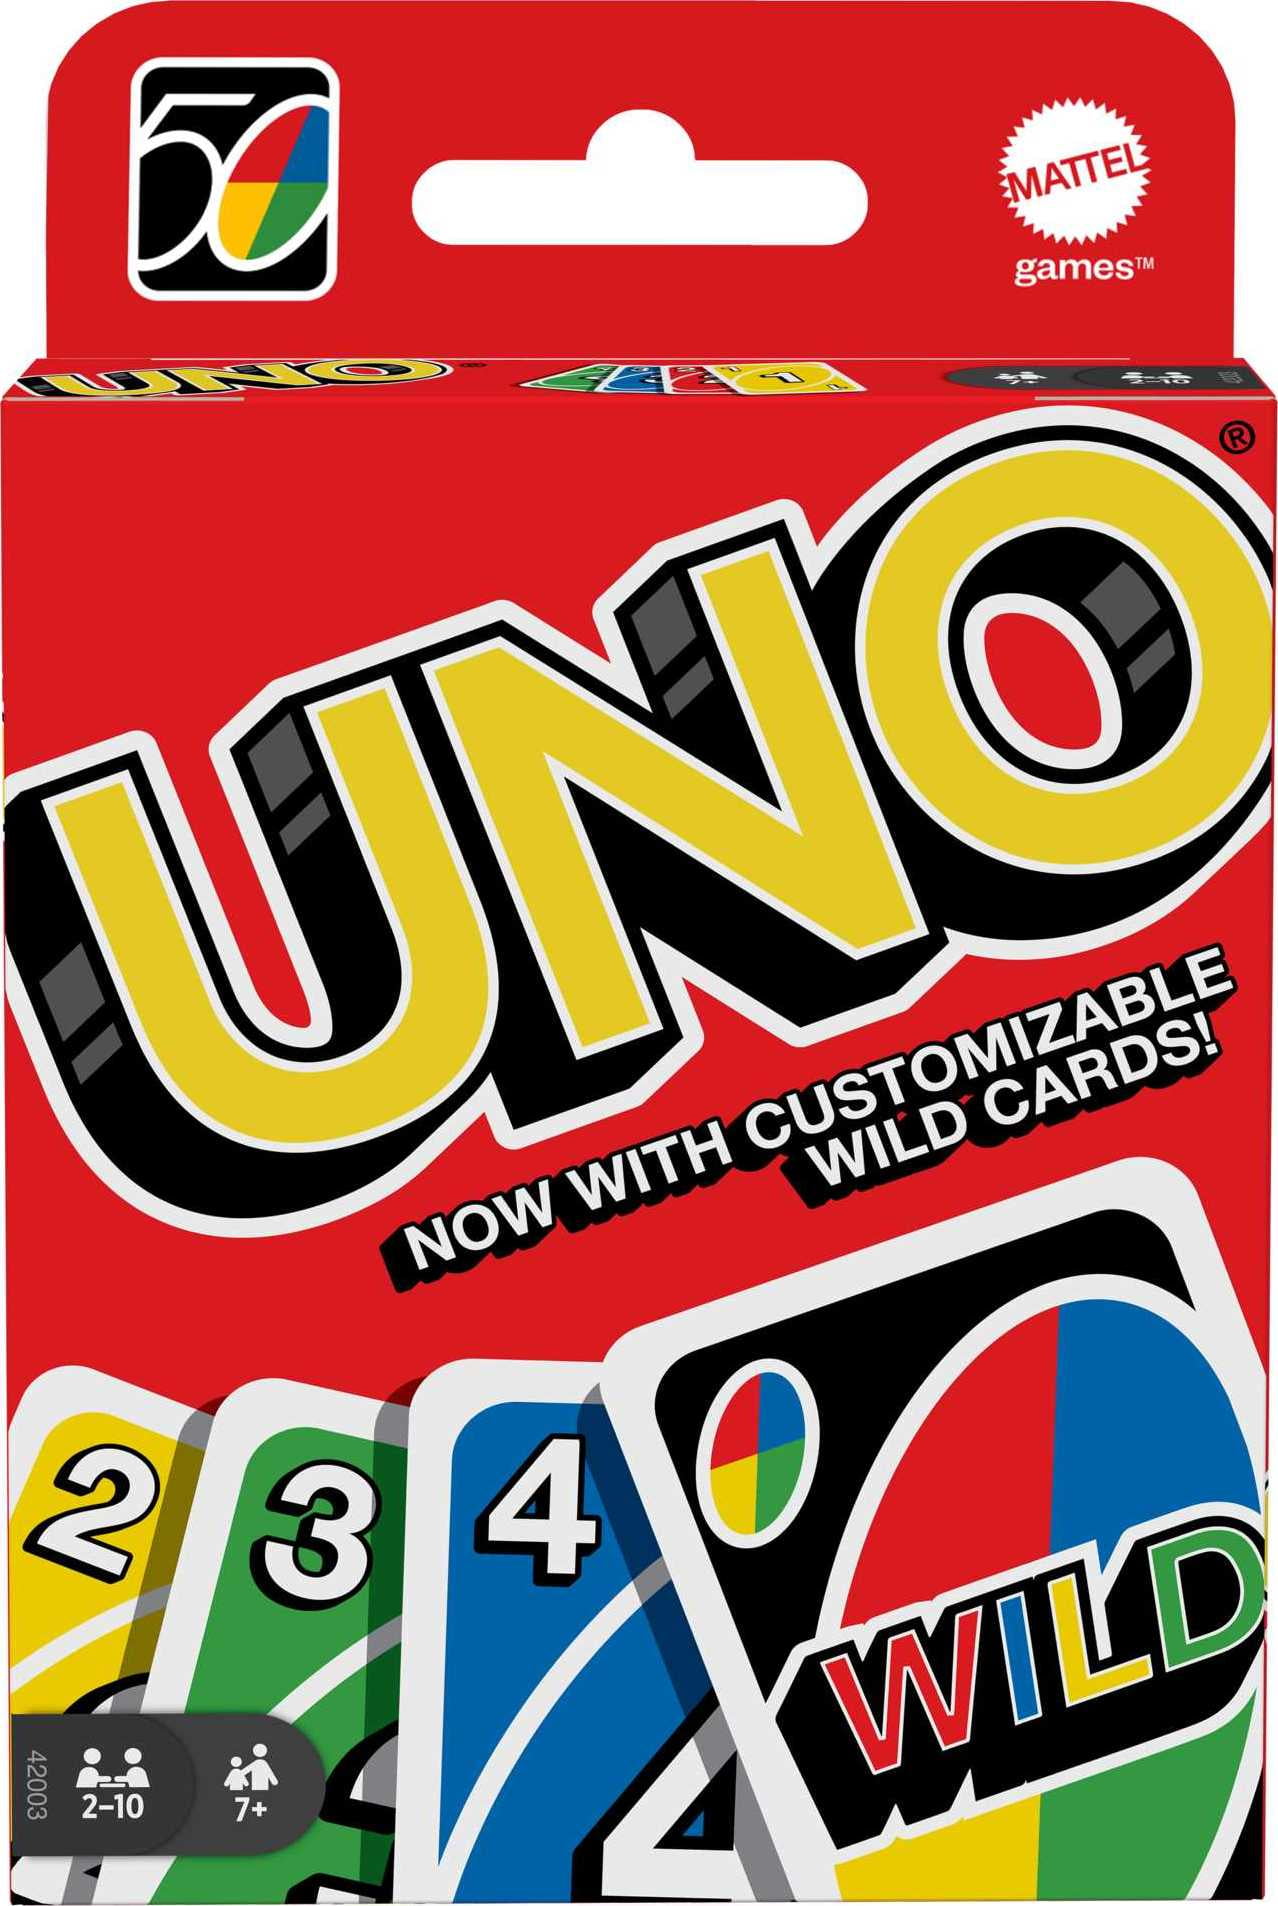 Mattel UNO Flip The Deck  Double Sided Card Game for 2-10 Players Ages 7Y New 